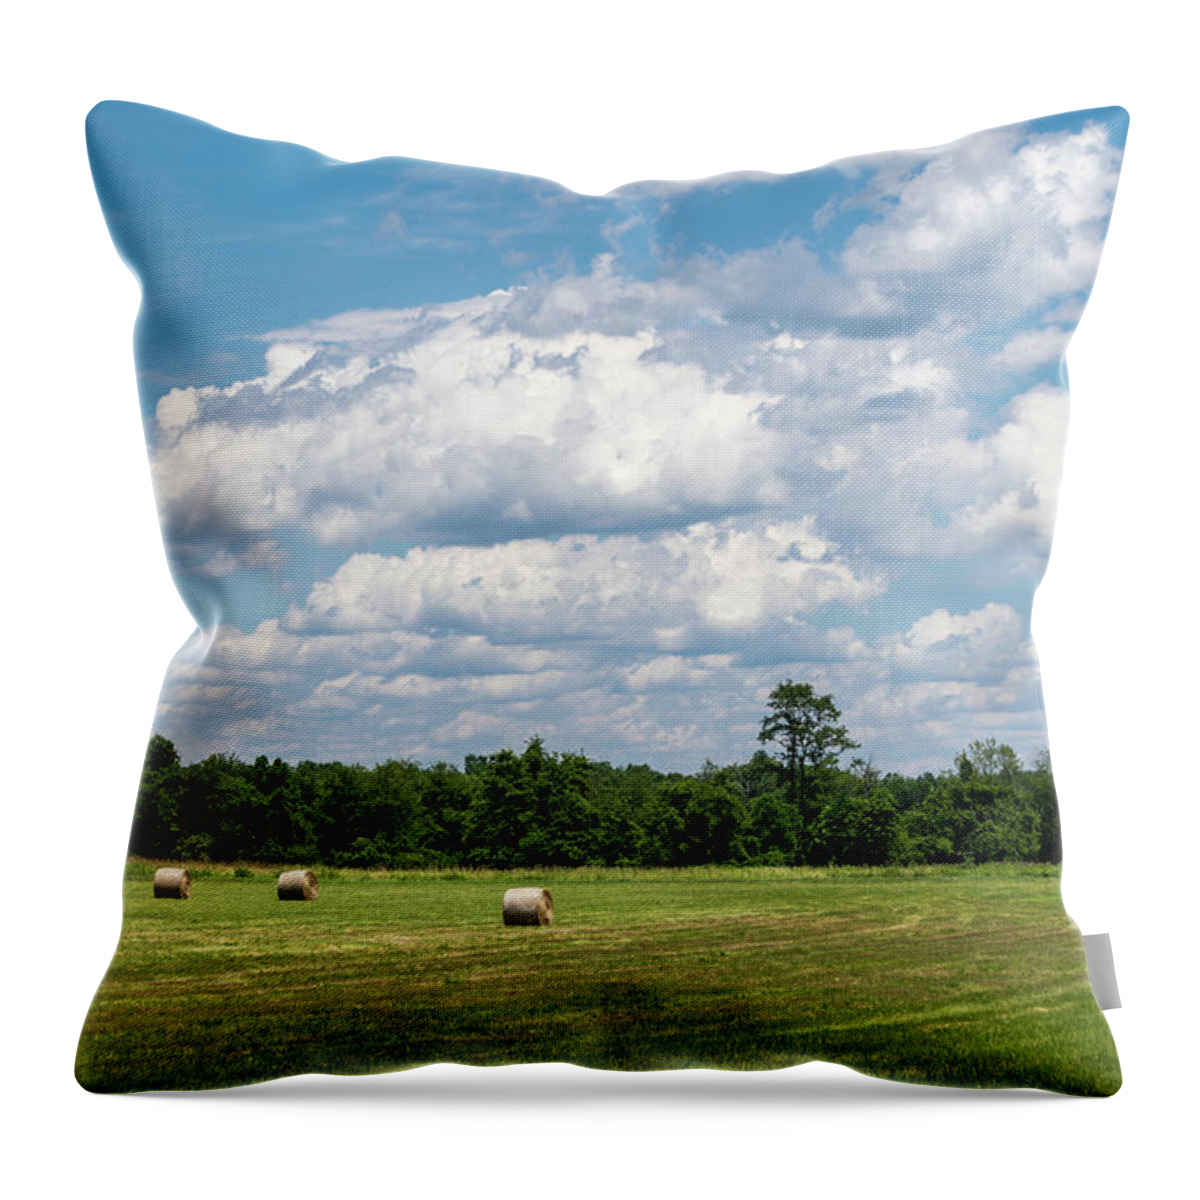 Lawrence Township Throw Pillow featuring the photograph Mercer County Landscape by Steven Richman